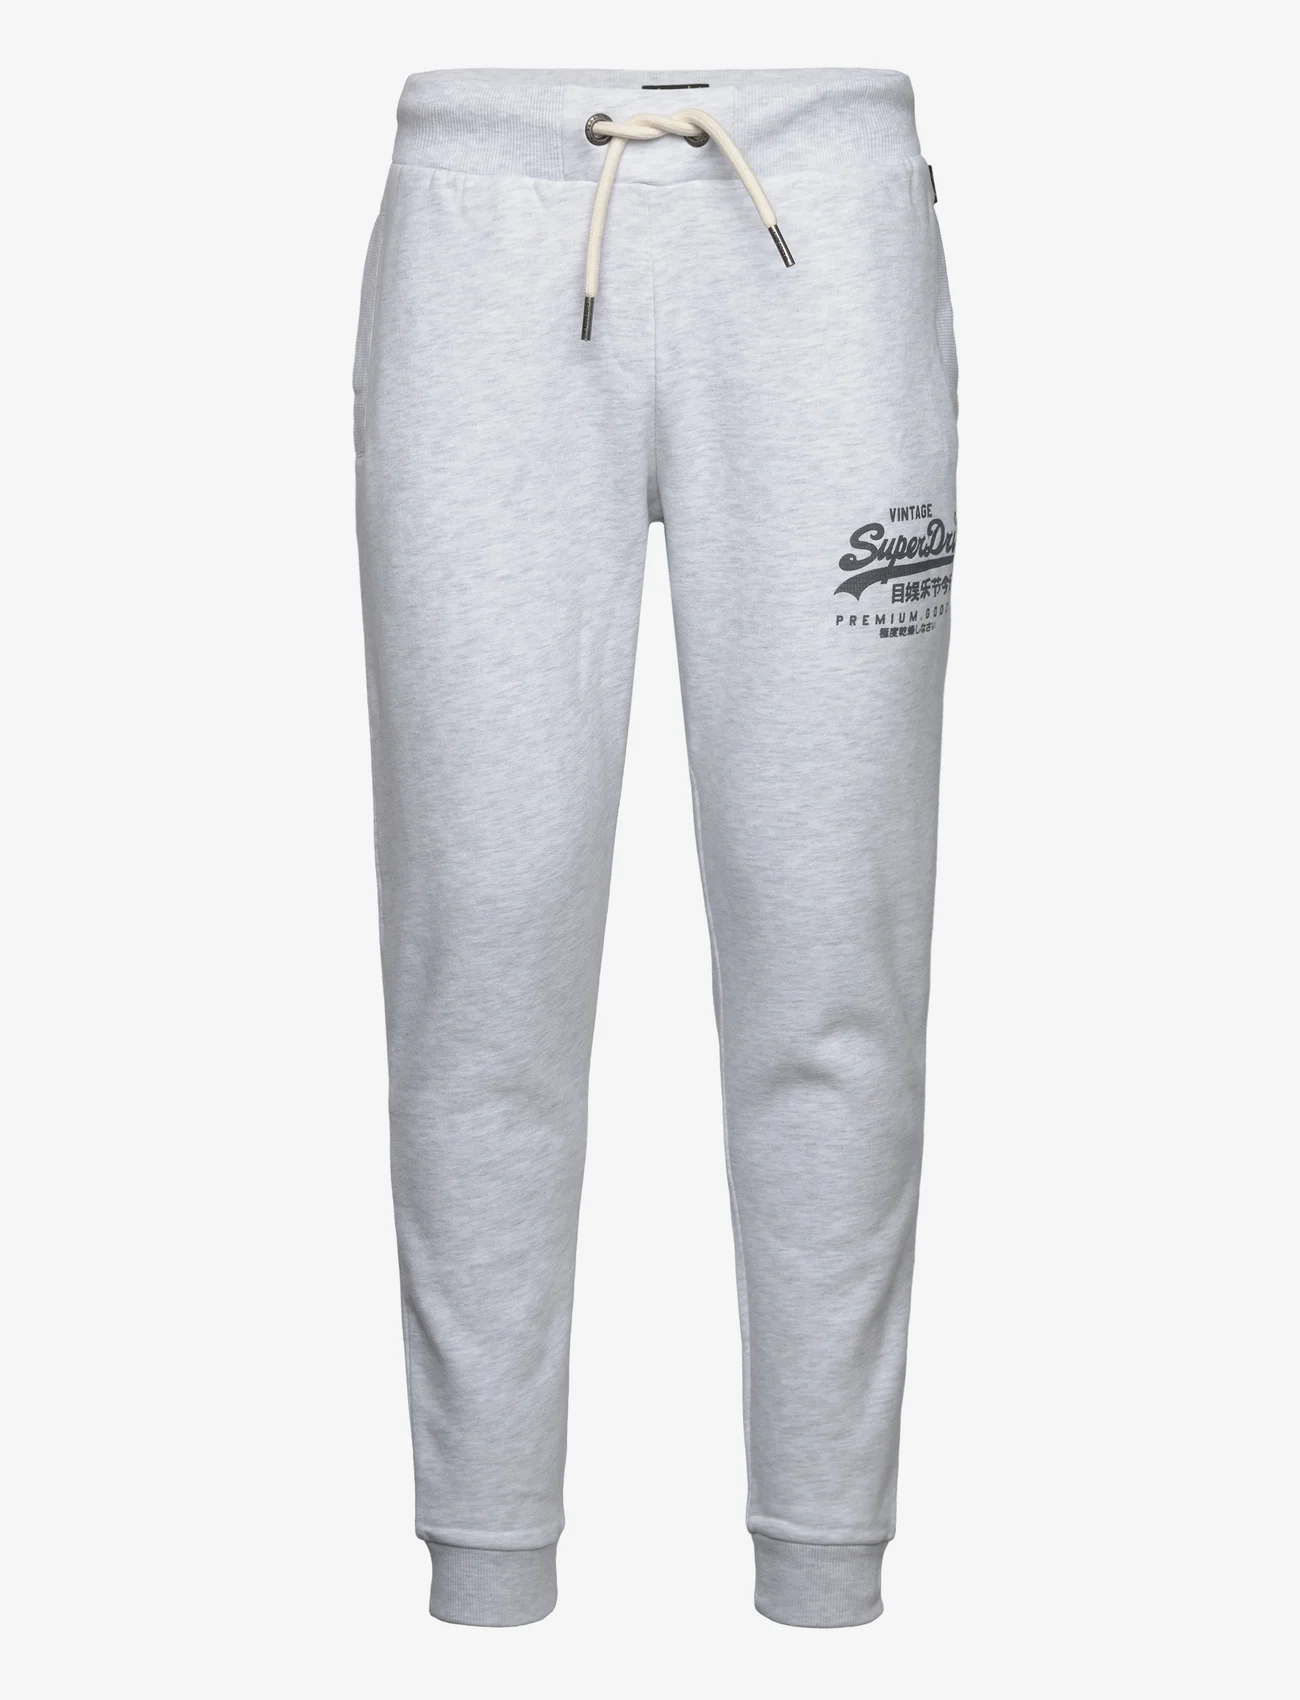 Superdry - CLASSIC VL HERITAGE JOGGER - collegehousut - ice marl - 0